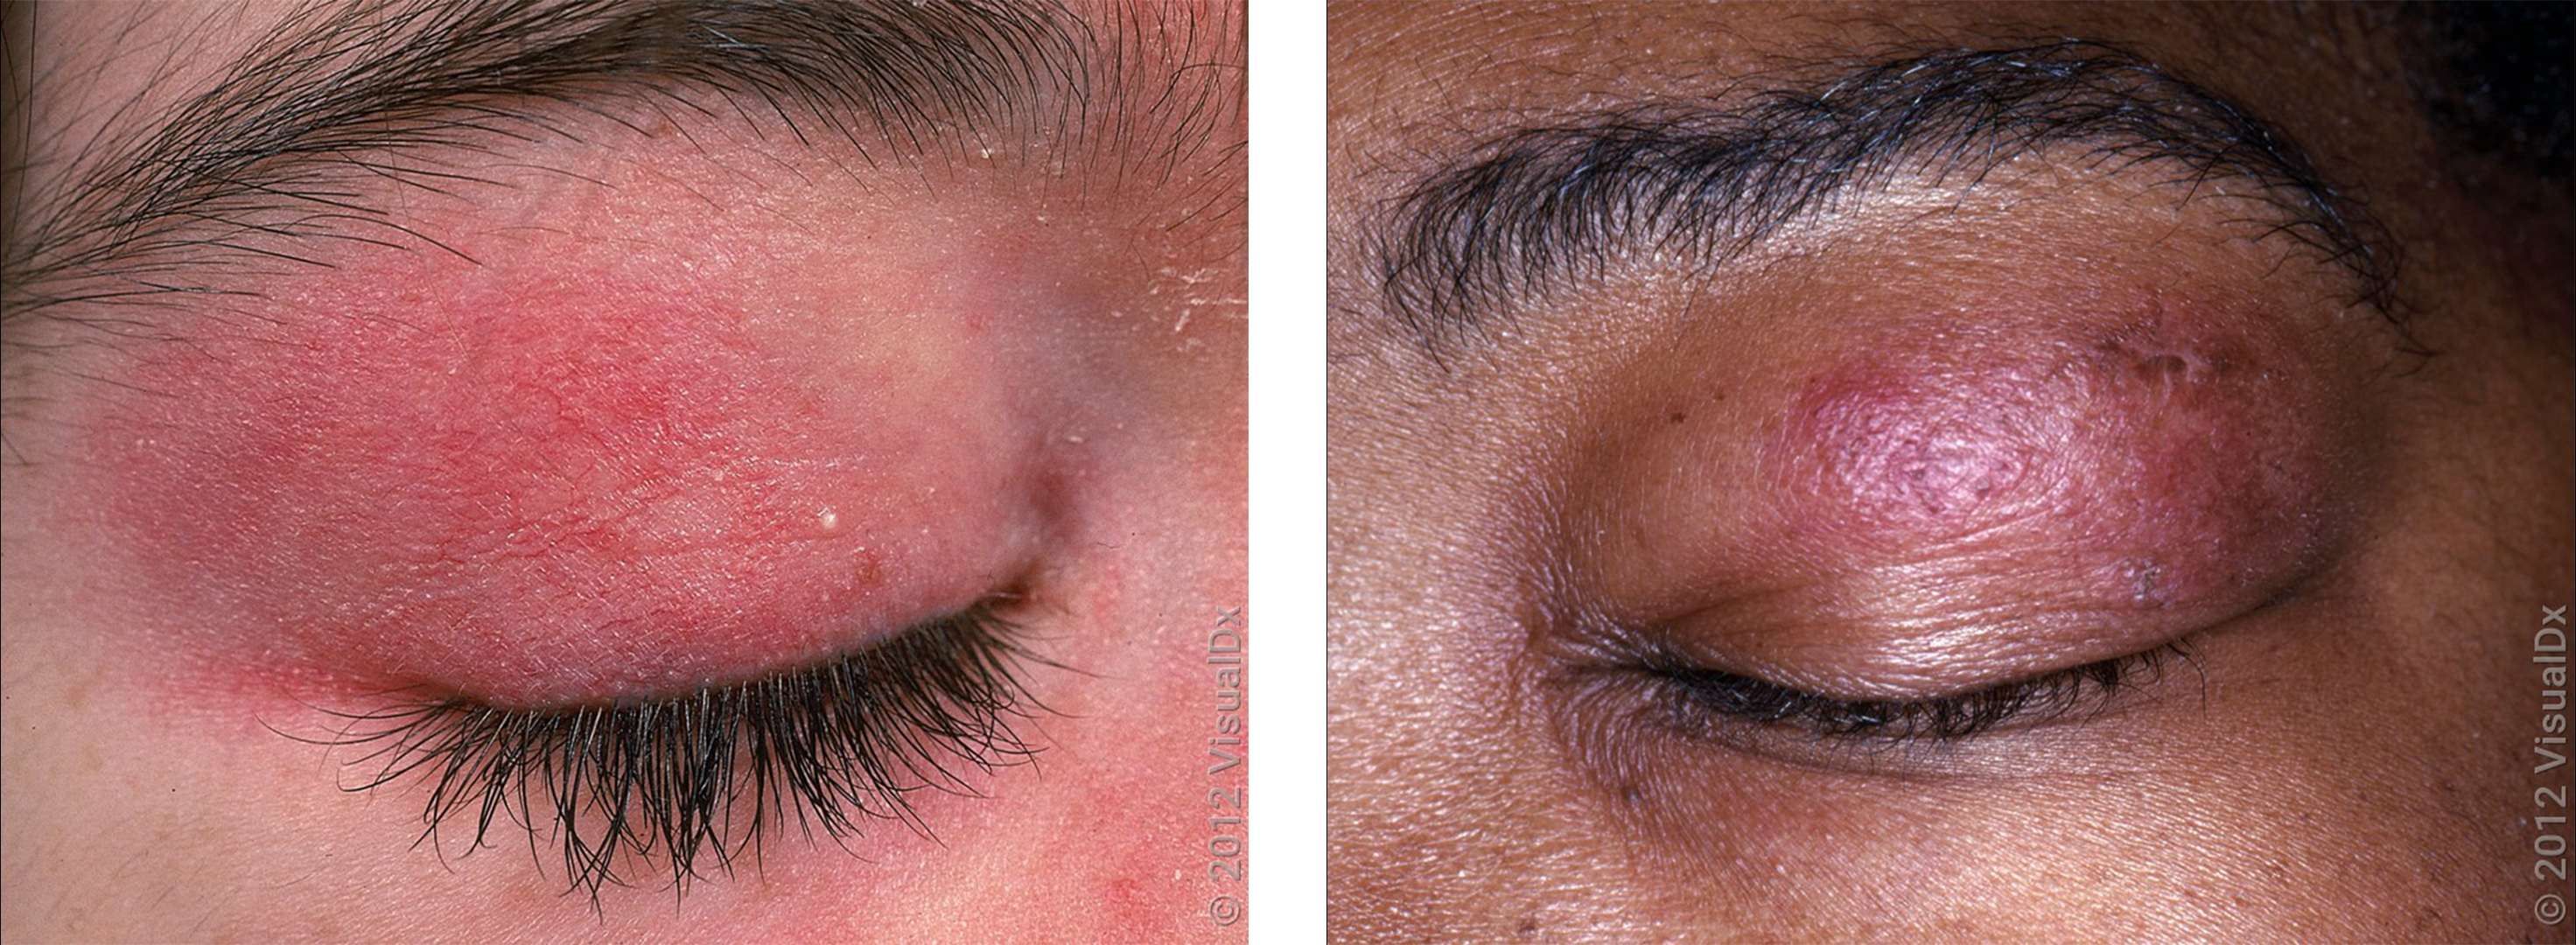 Left: Close-up of an eyelid with a red rash in dermatomyositis. Right: Close-up of an eyelid with a purple rash in dermatomyositis.